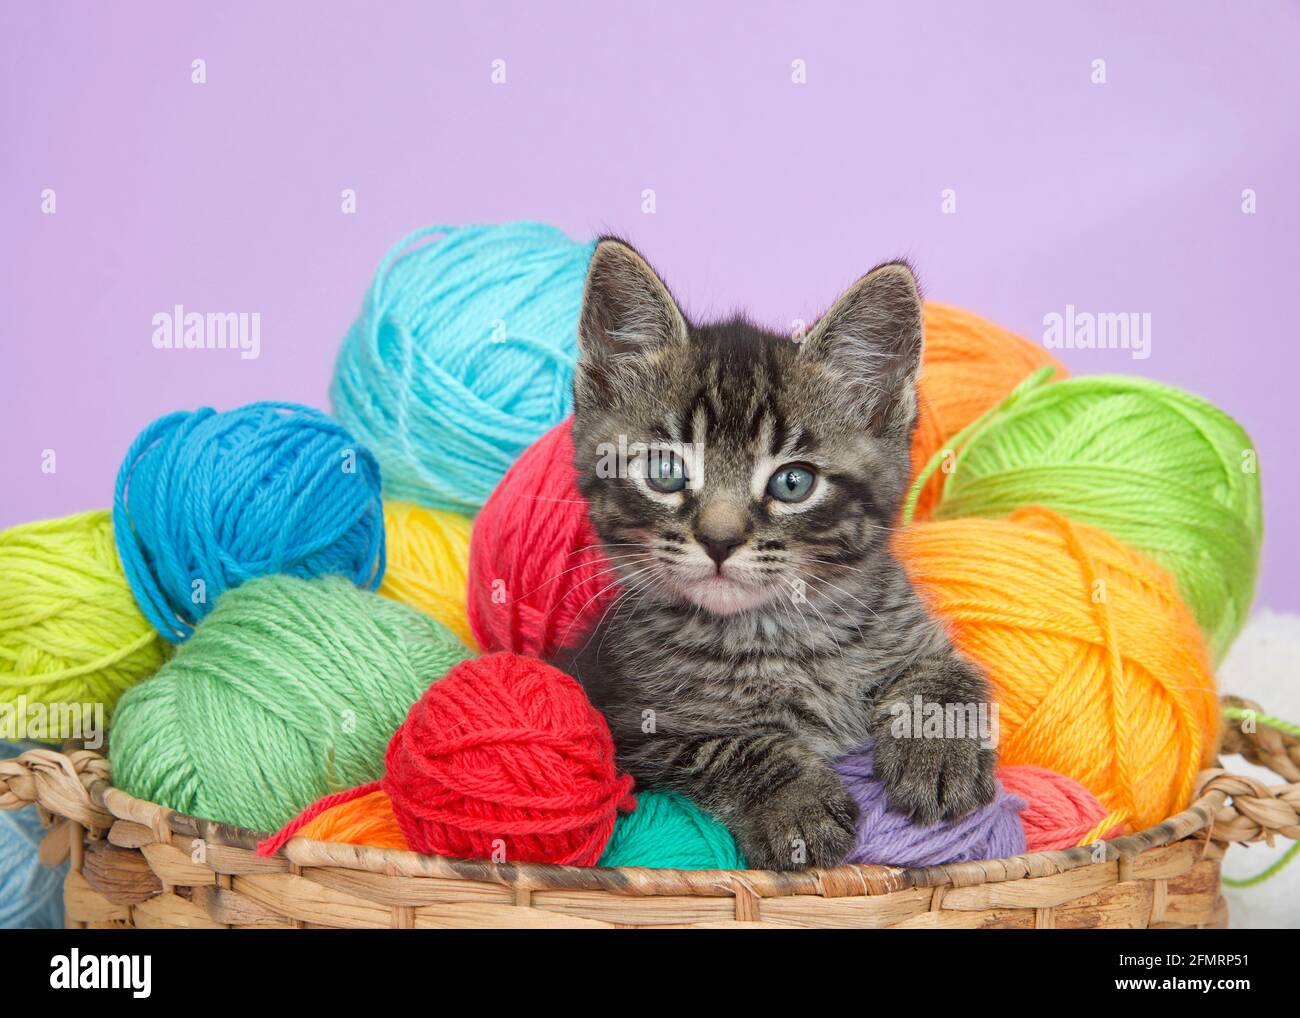 Close up of one adorable tabby kitten peeking out of a basket full of colorful yarn balls, purple background Stock Photo